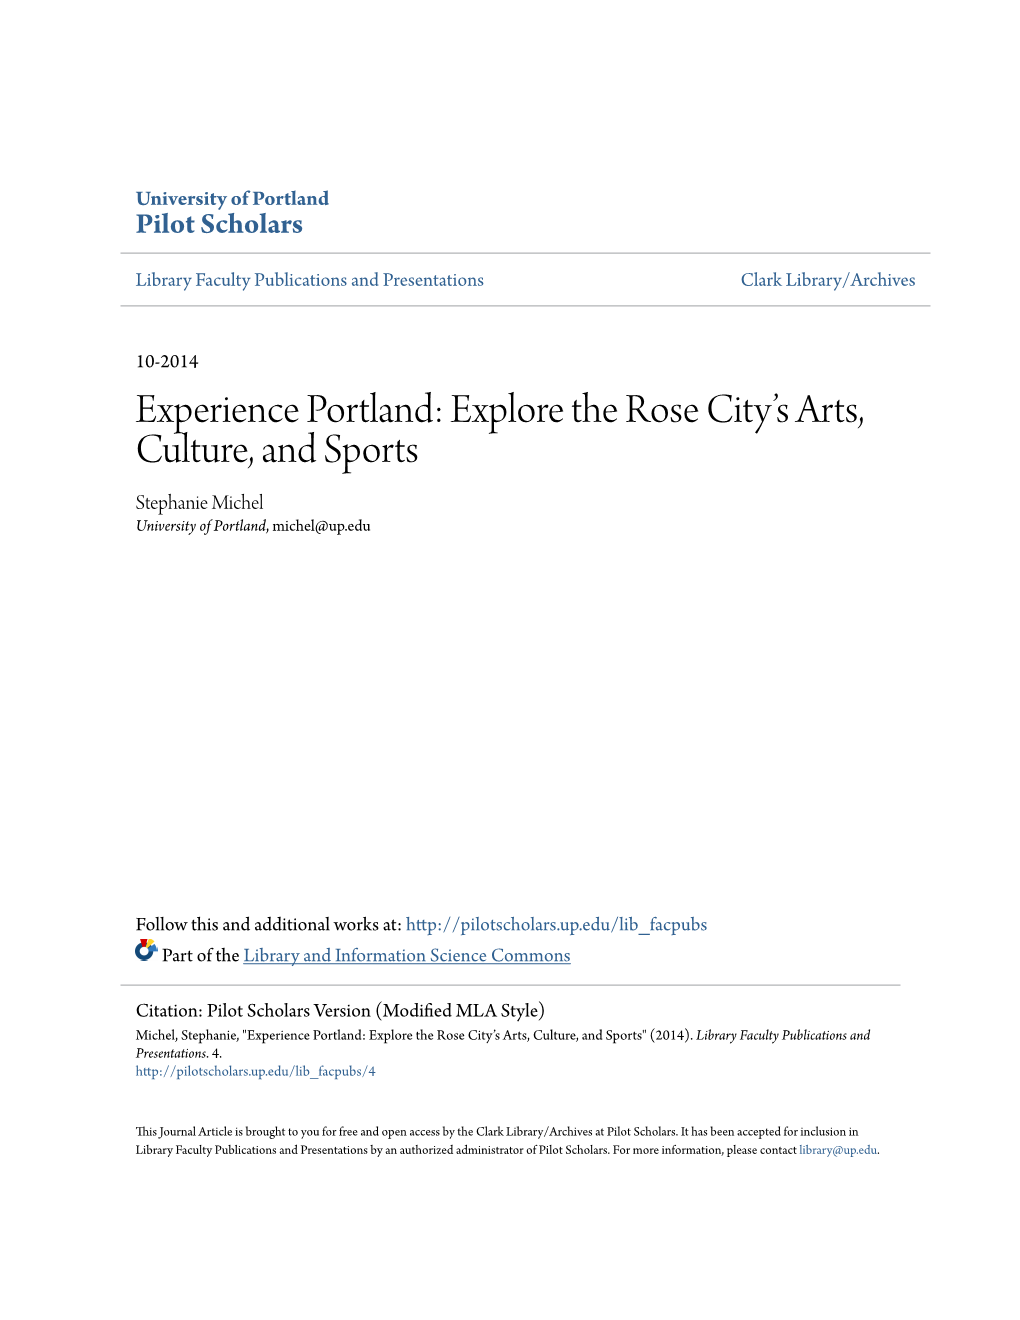 Experience Portland: Explore the Rose City's Arts, Culture, and Sports